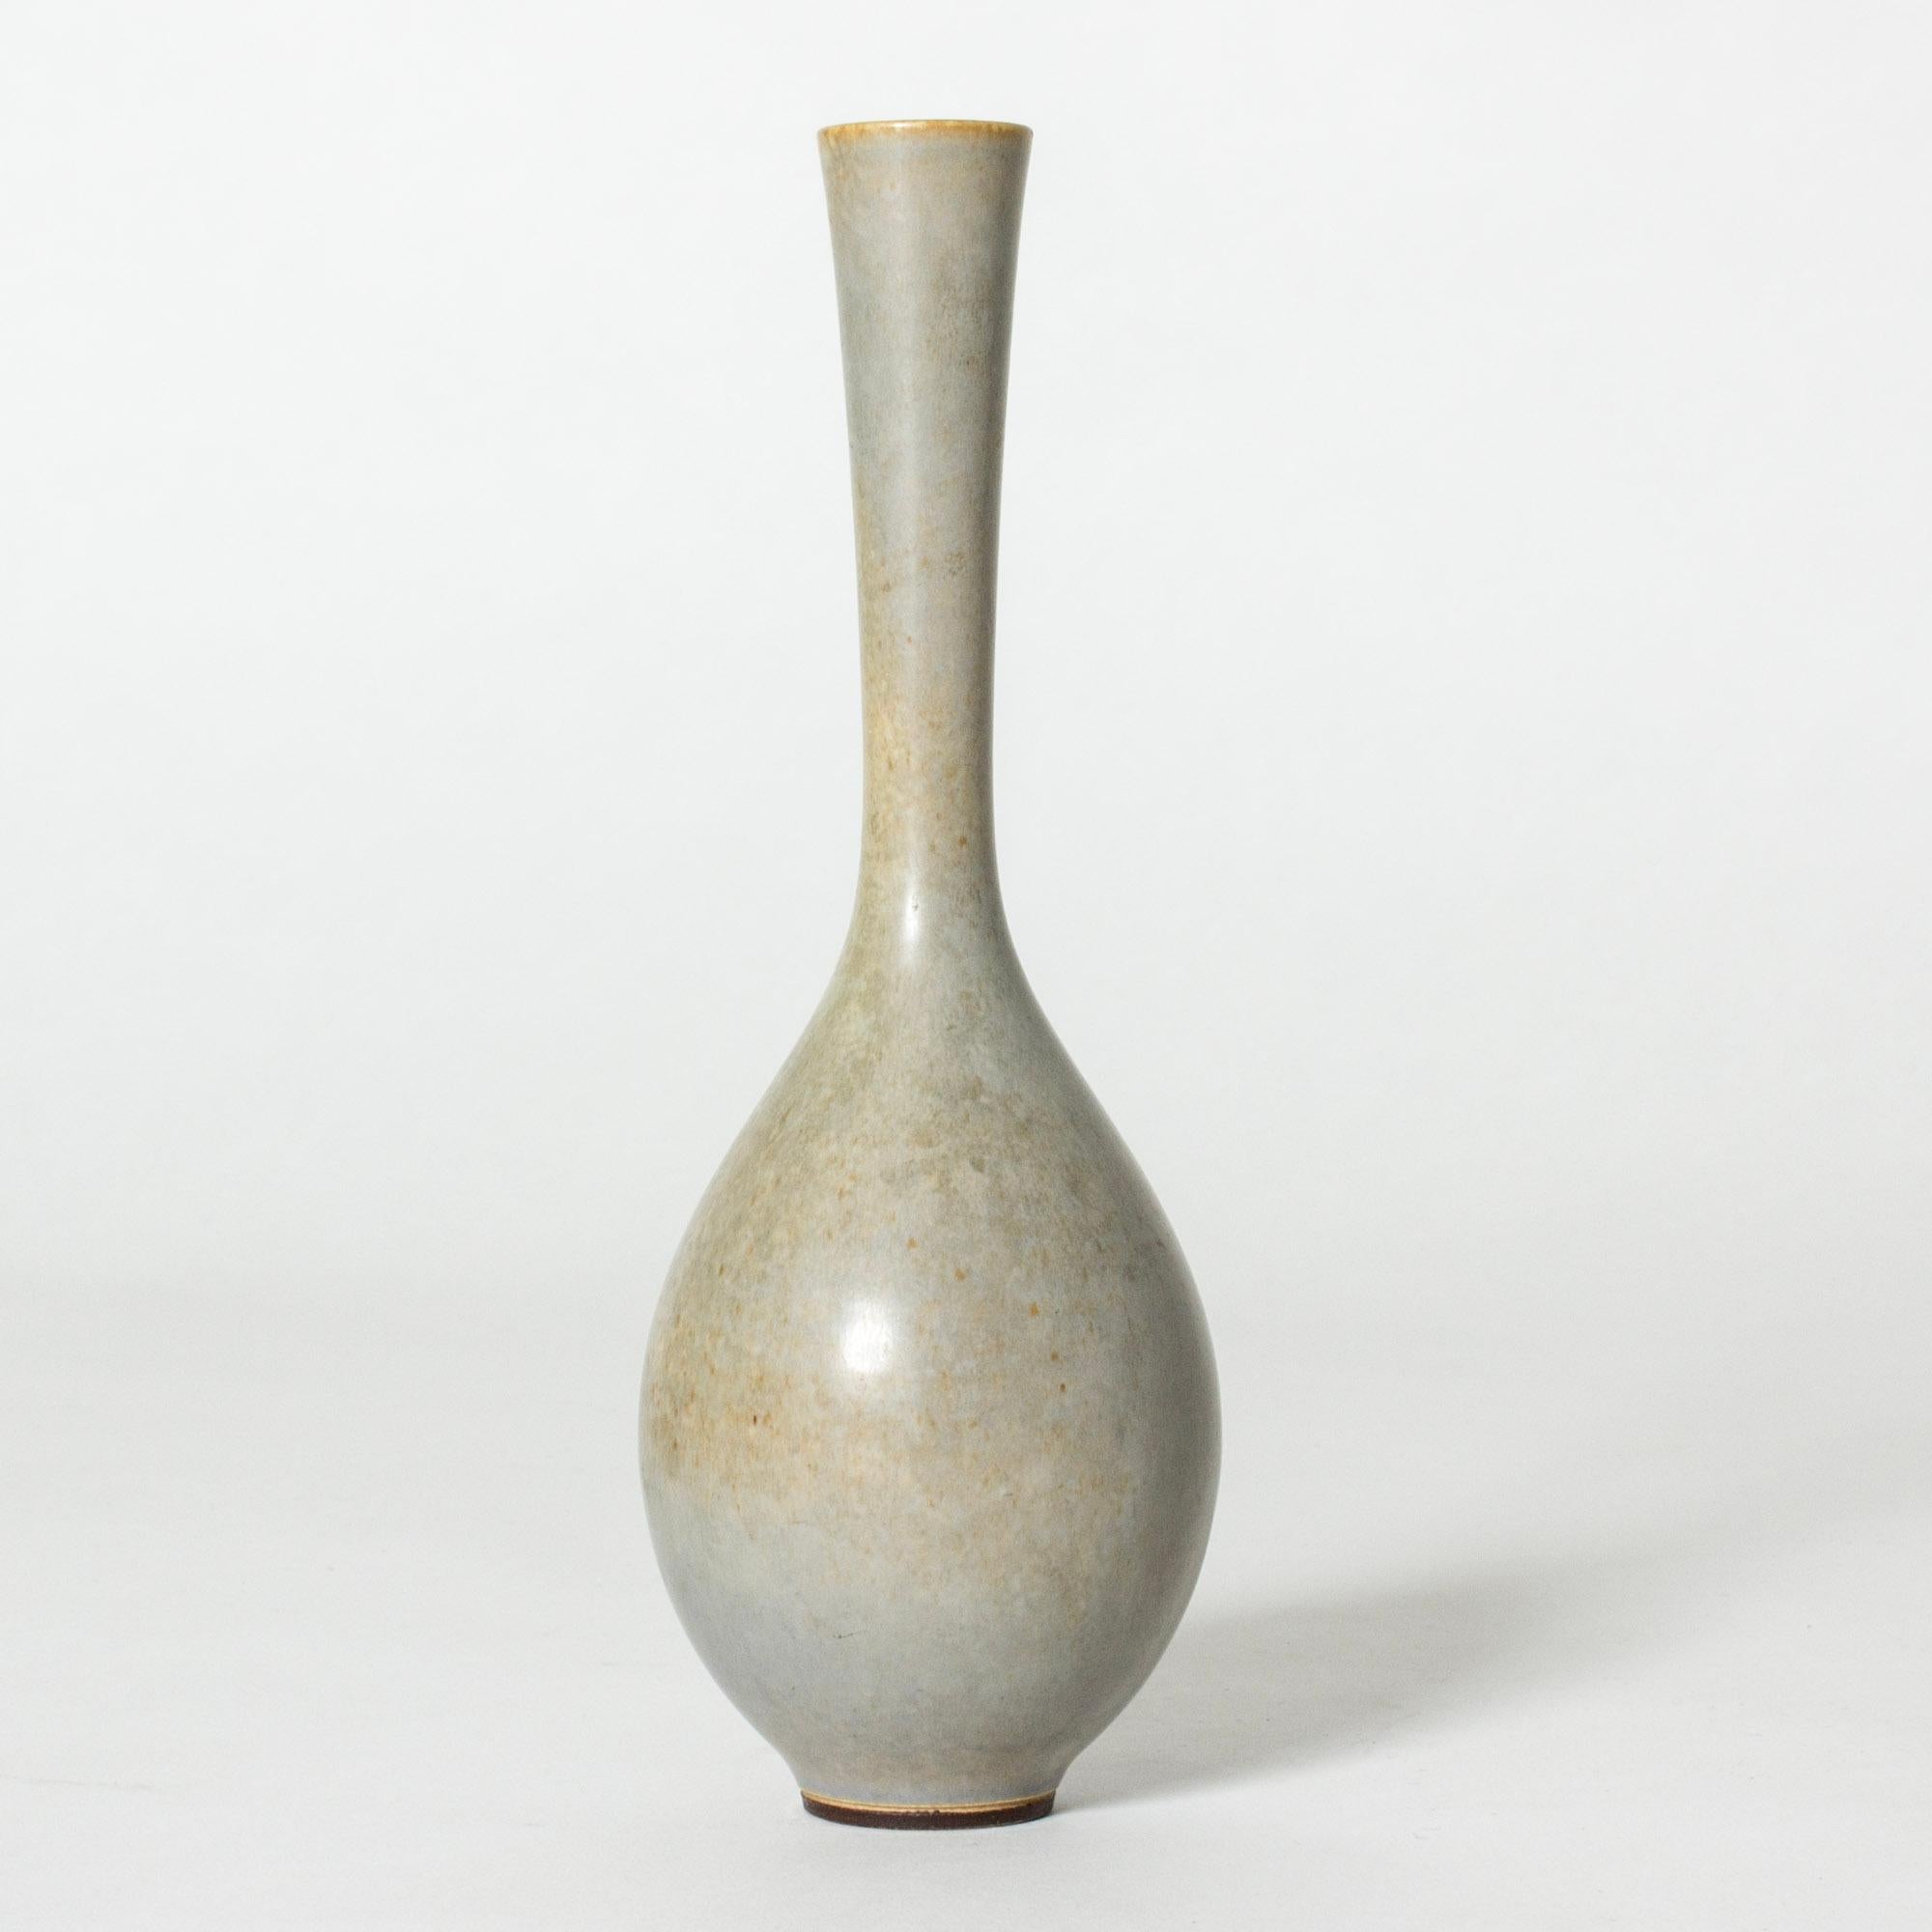 Lovely stoneware vase by Berndt Friberg, in a slender onion form with a long neck. Greyish blue glaze with yellow nuances.

Berndt Friberg was a Swedish ceramicist, renowned for his stoneware vases and vessels for Gustavsberg. His pure, composed